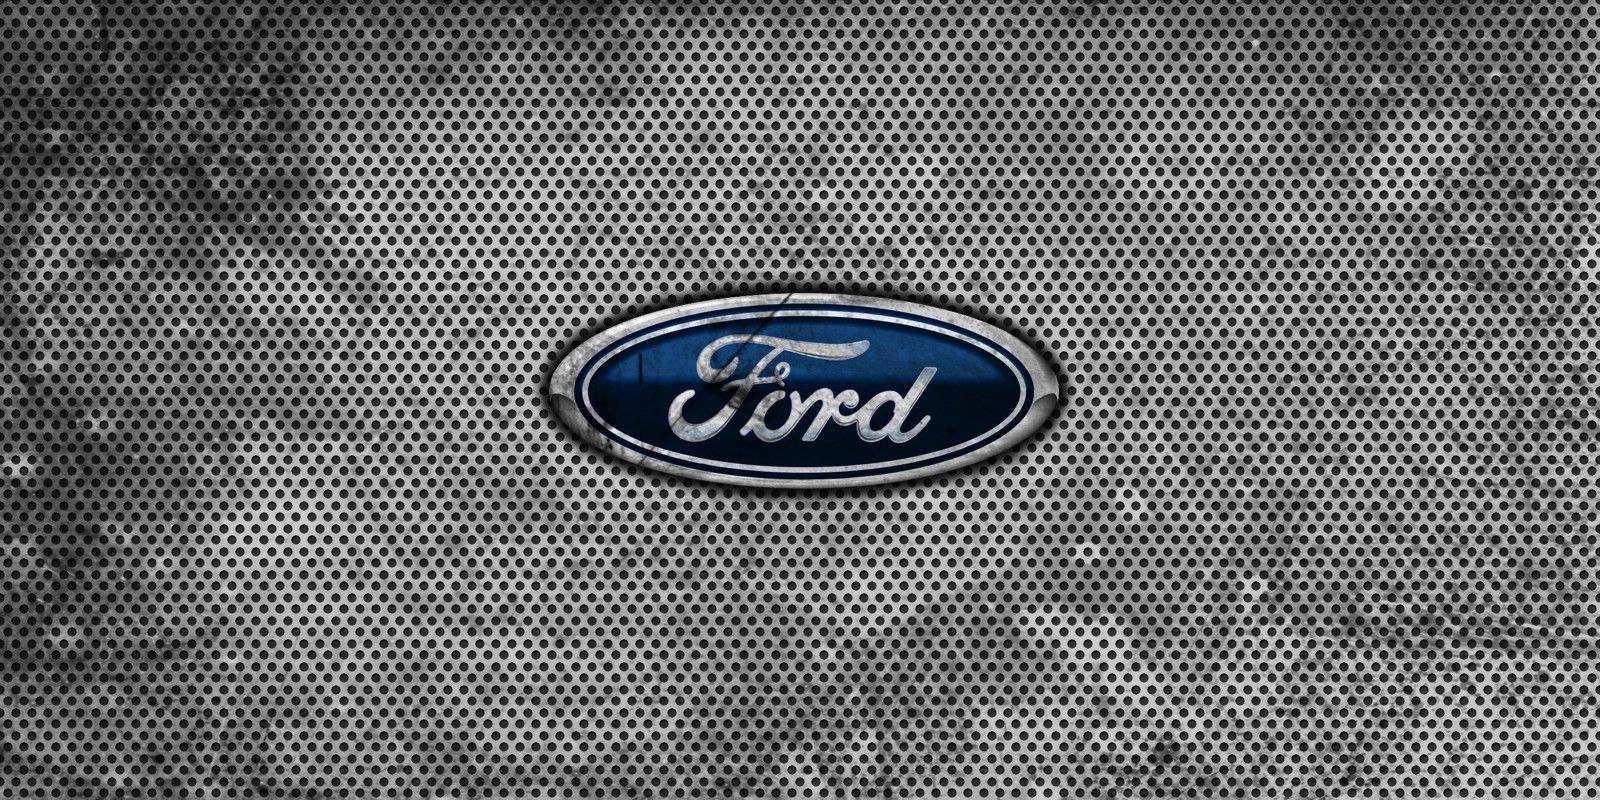 Ford Logo Widescreen Wallpapers.